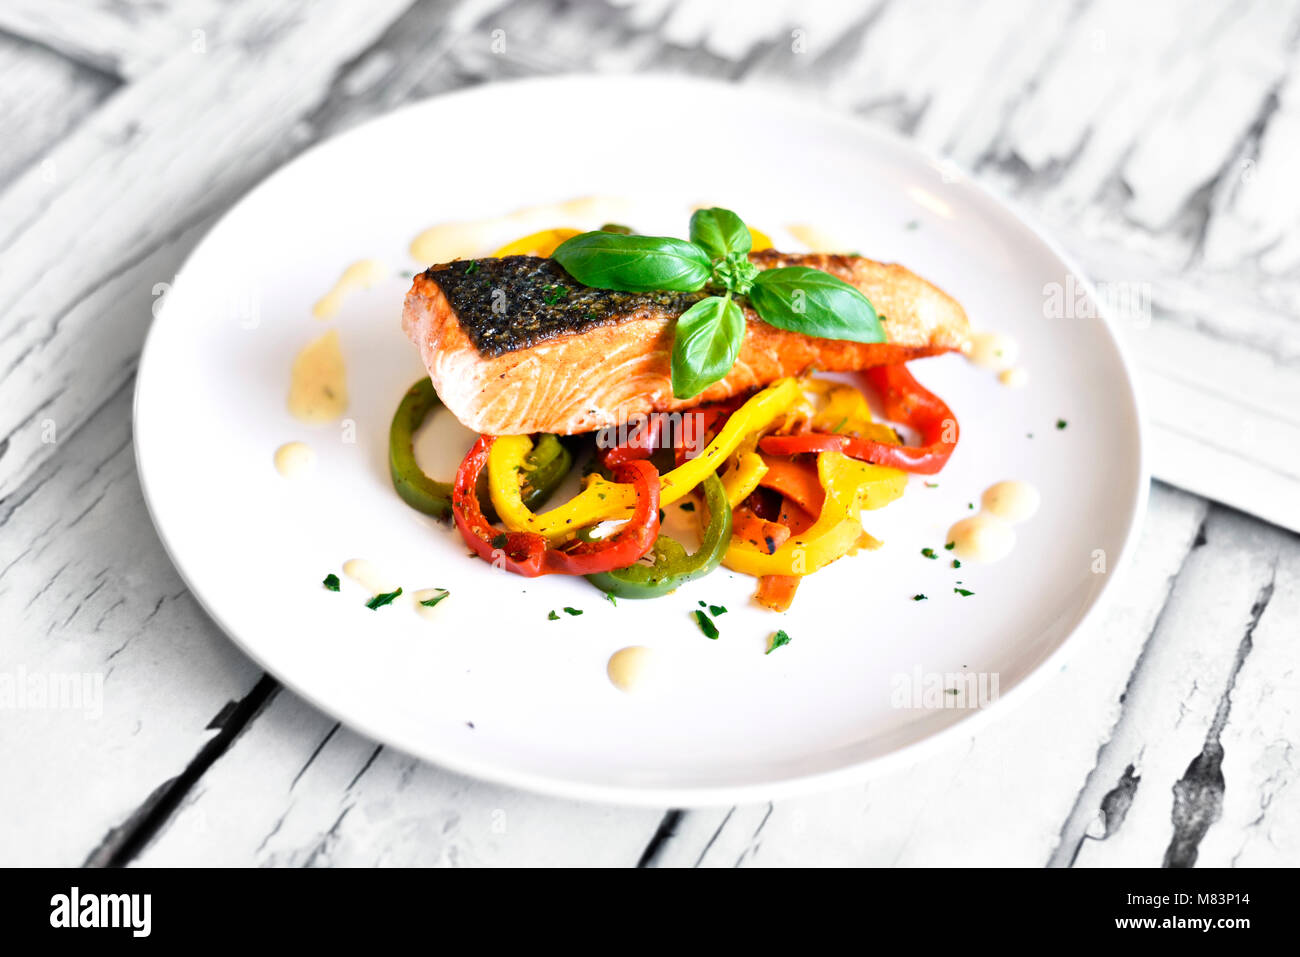 Delicious salmon filet and red bell pepper vegetables on a white plate. Healthy meal, decorated with basil leaf. Grilled salmon filet. Stock Photo